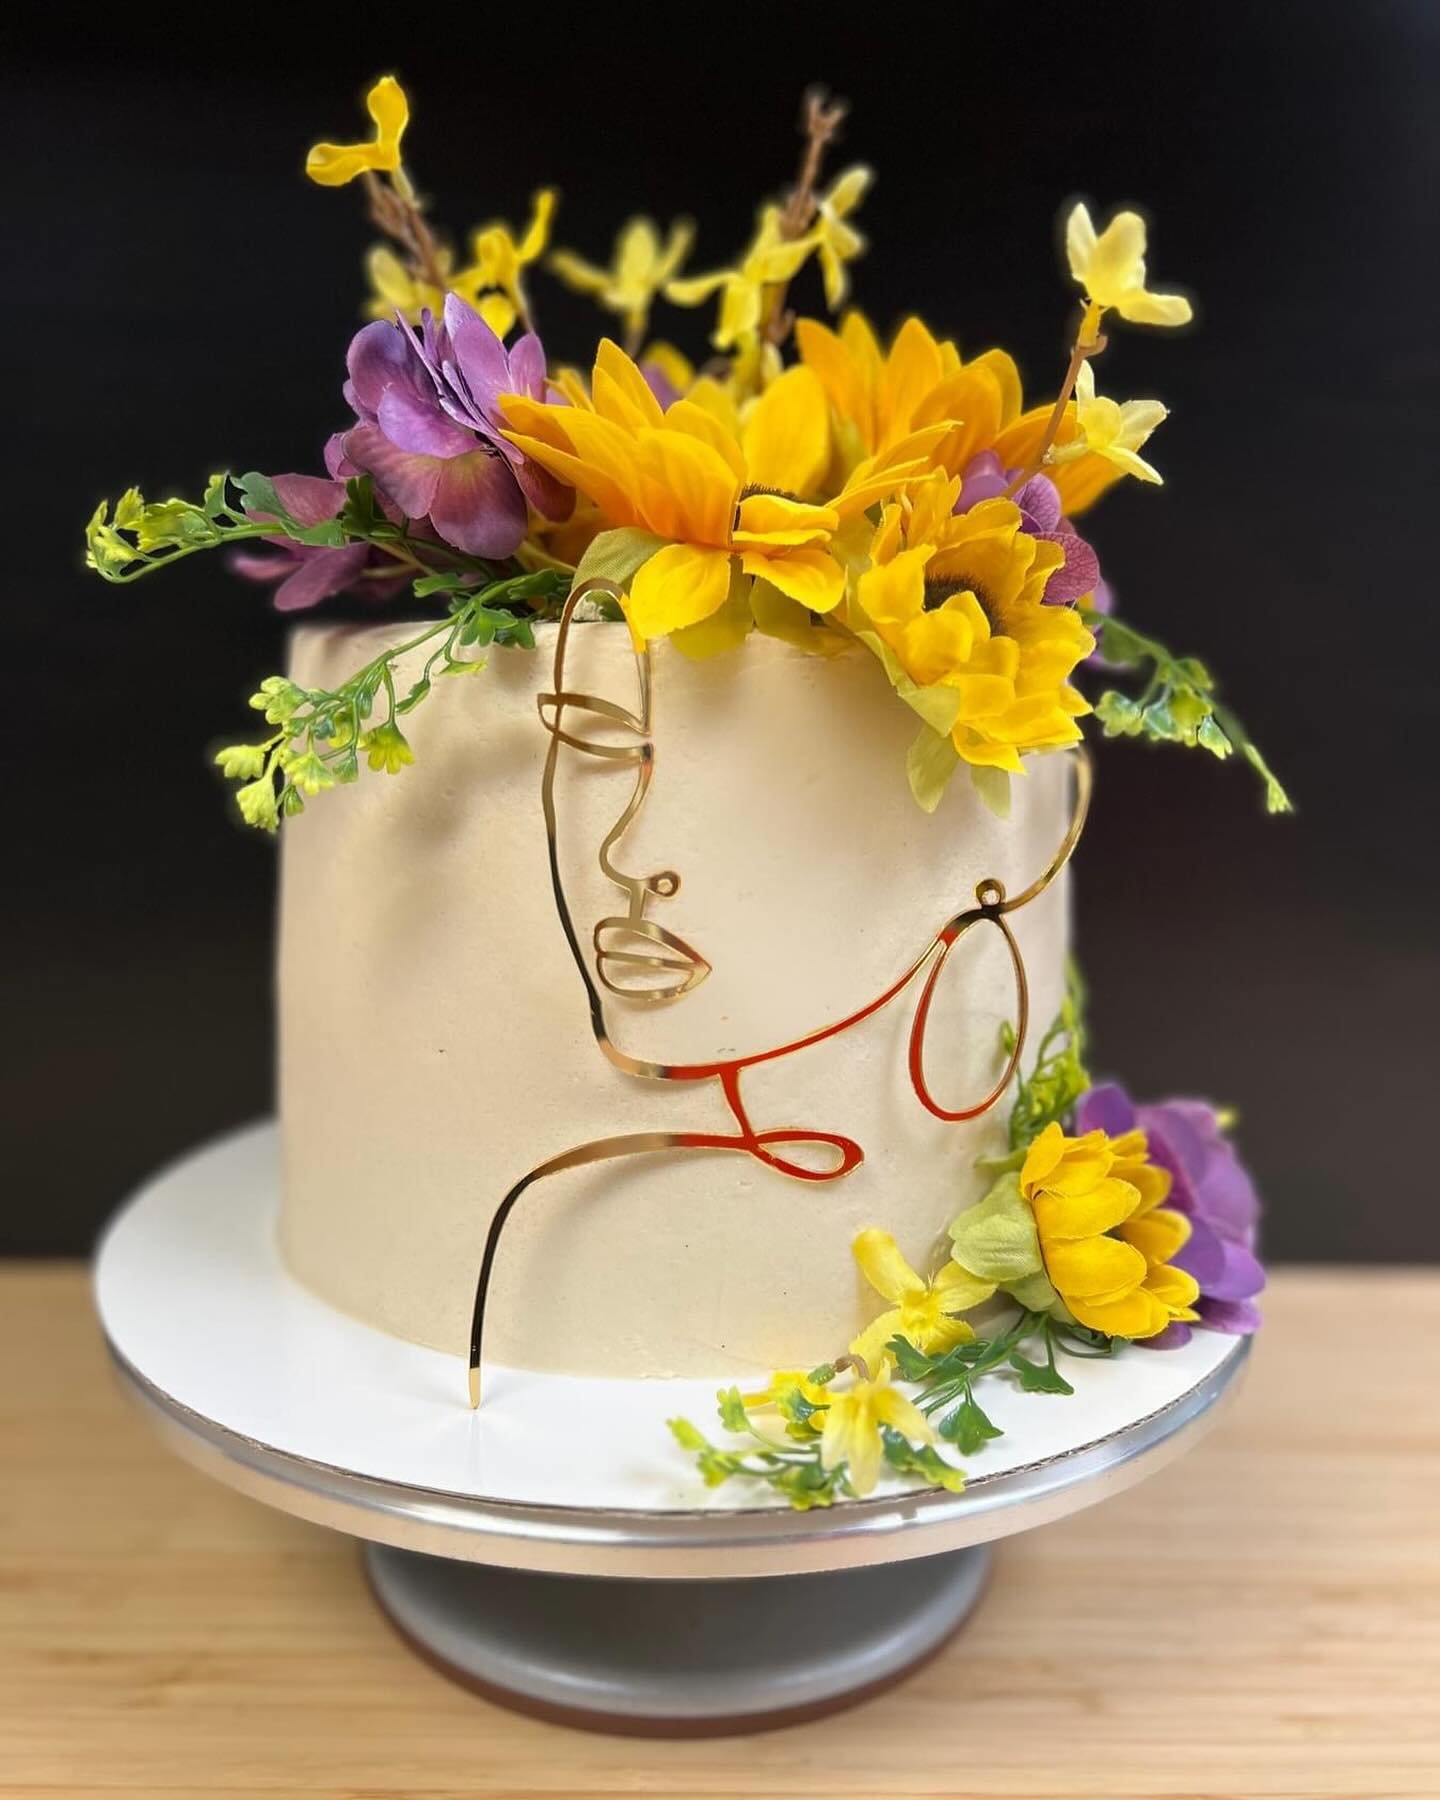 We LOVE how this simple, yet stunning cake came out 😍 Sunflowers are always a beautiful addition to a cake, but we think the purple really made them pop 🌻🪻

 #johnsonvillecakes #cakesofwacotexas #cakesofmcgregortexas #cakesofwaco #birthdaycakesofw